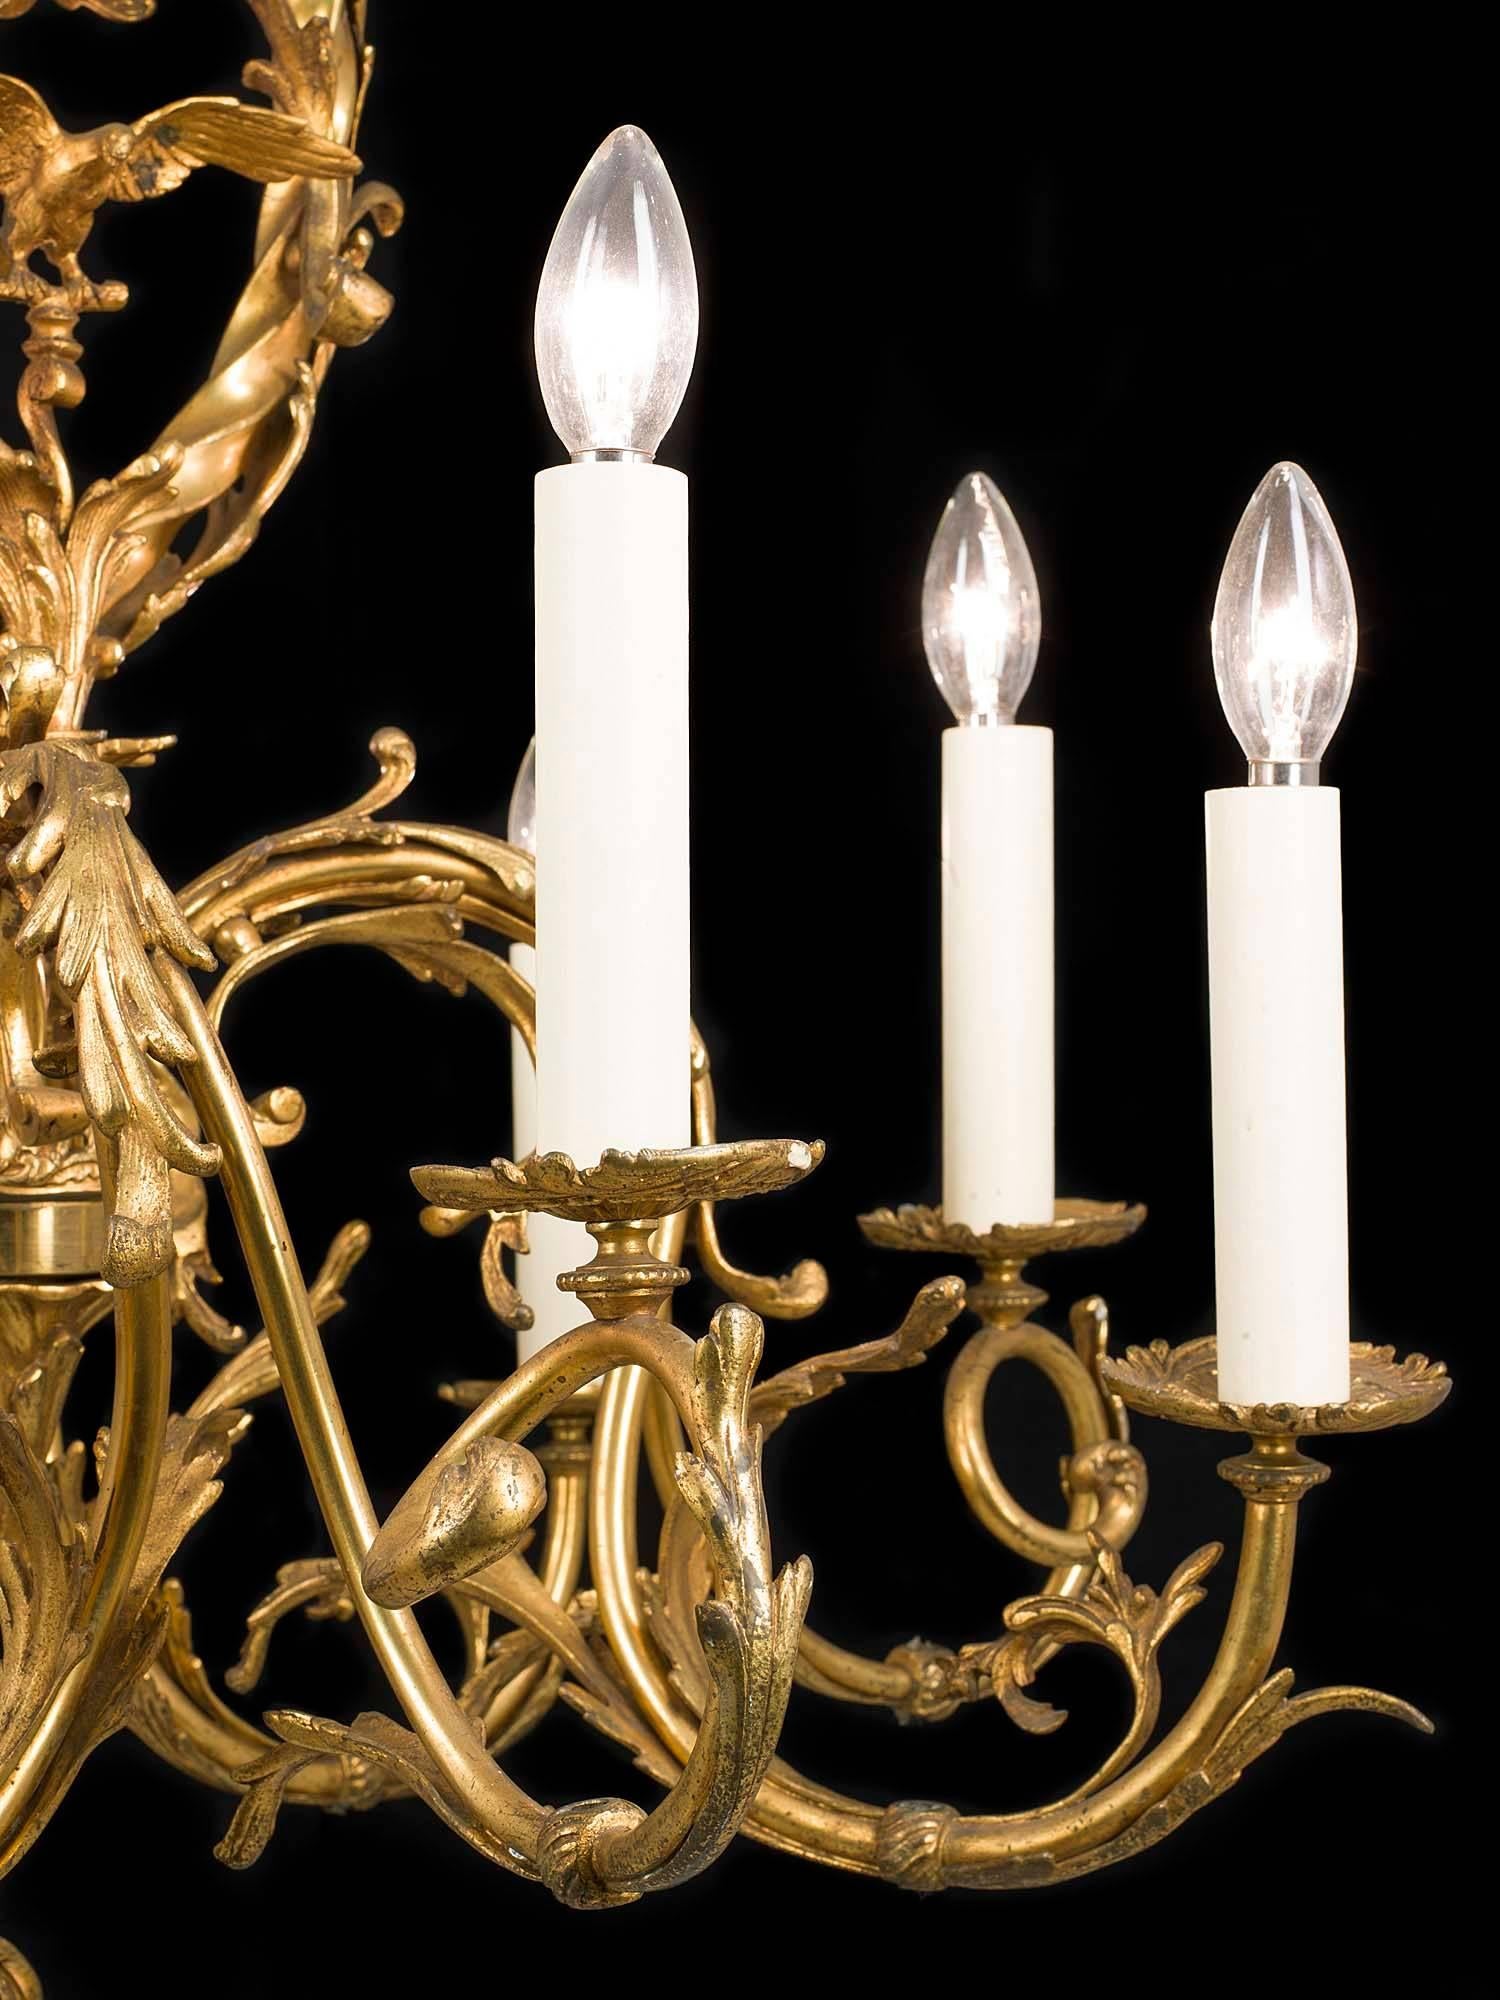 A large Rococo style gilt bronze eight branch antique chandelier which was originally made for gas but is now converted to electricity. The central barley twist scrolling stem frames a small eagle alighting onto a pedestal, and the eight scrolled